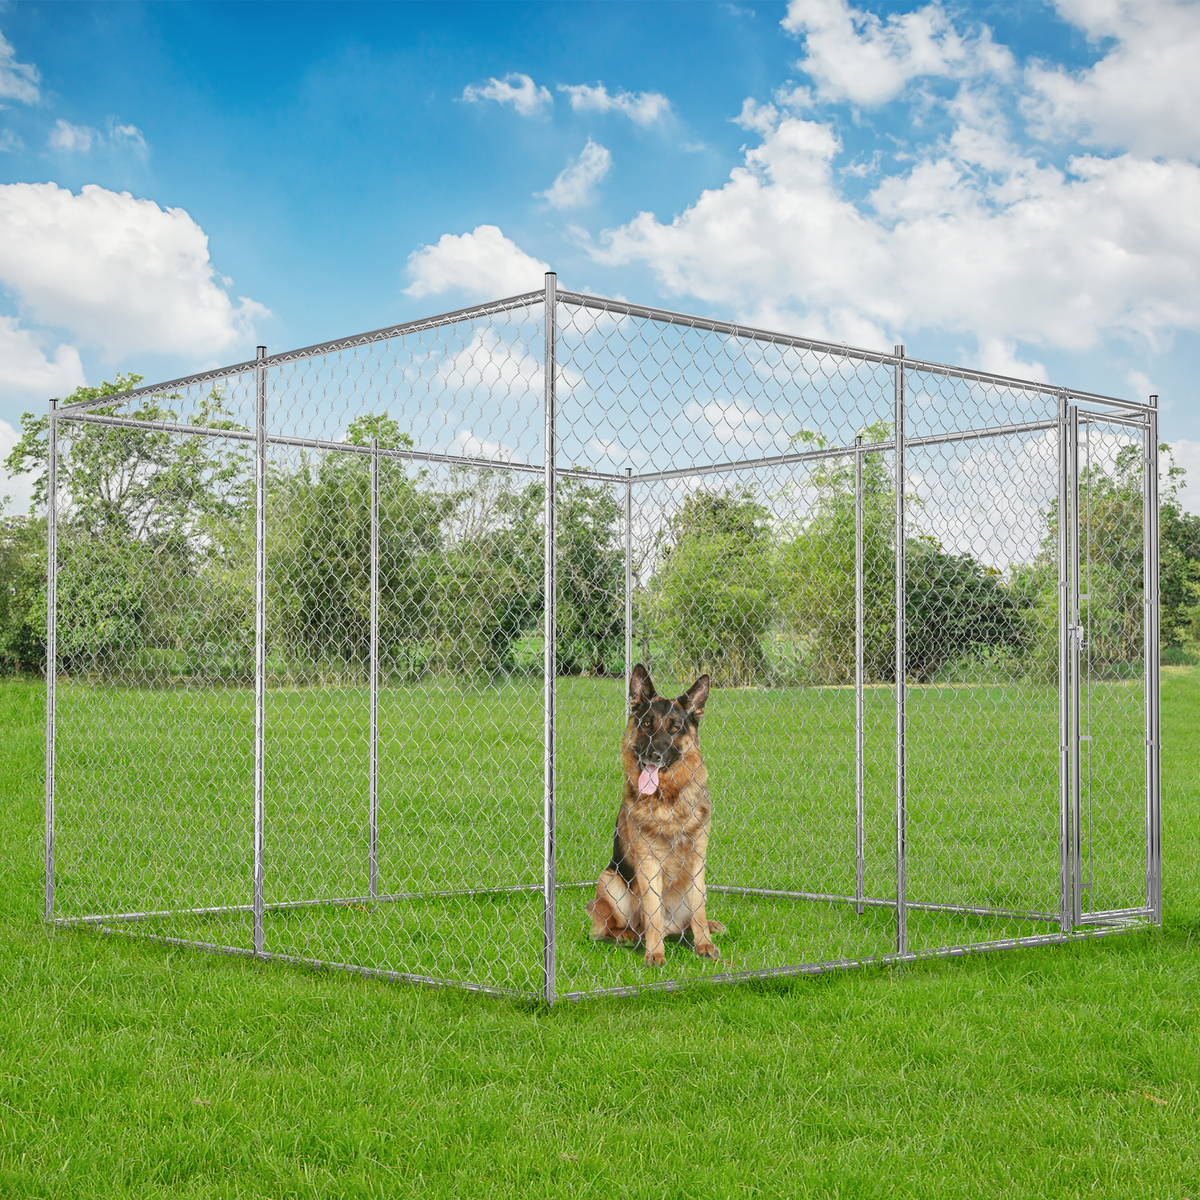 HITTITE 10x10x6 Large Dog Kennel Outdoor, Heavy Duty Dog Cage with Secure Lock,Square Dog Pen Run,Galvanized Chain Link Dog Crate Metal Dog Pen Enclosure House for Backyard Farm Without Roof(10&#39;Lx10&#39;Wx6&#39;H)